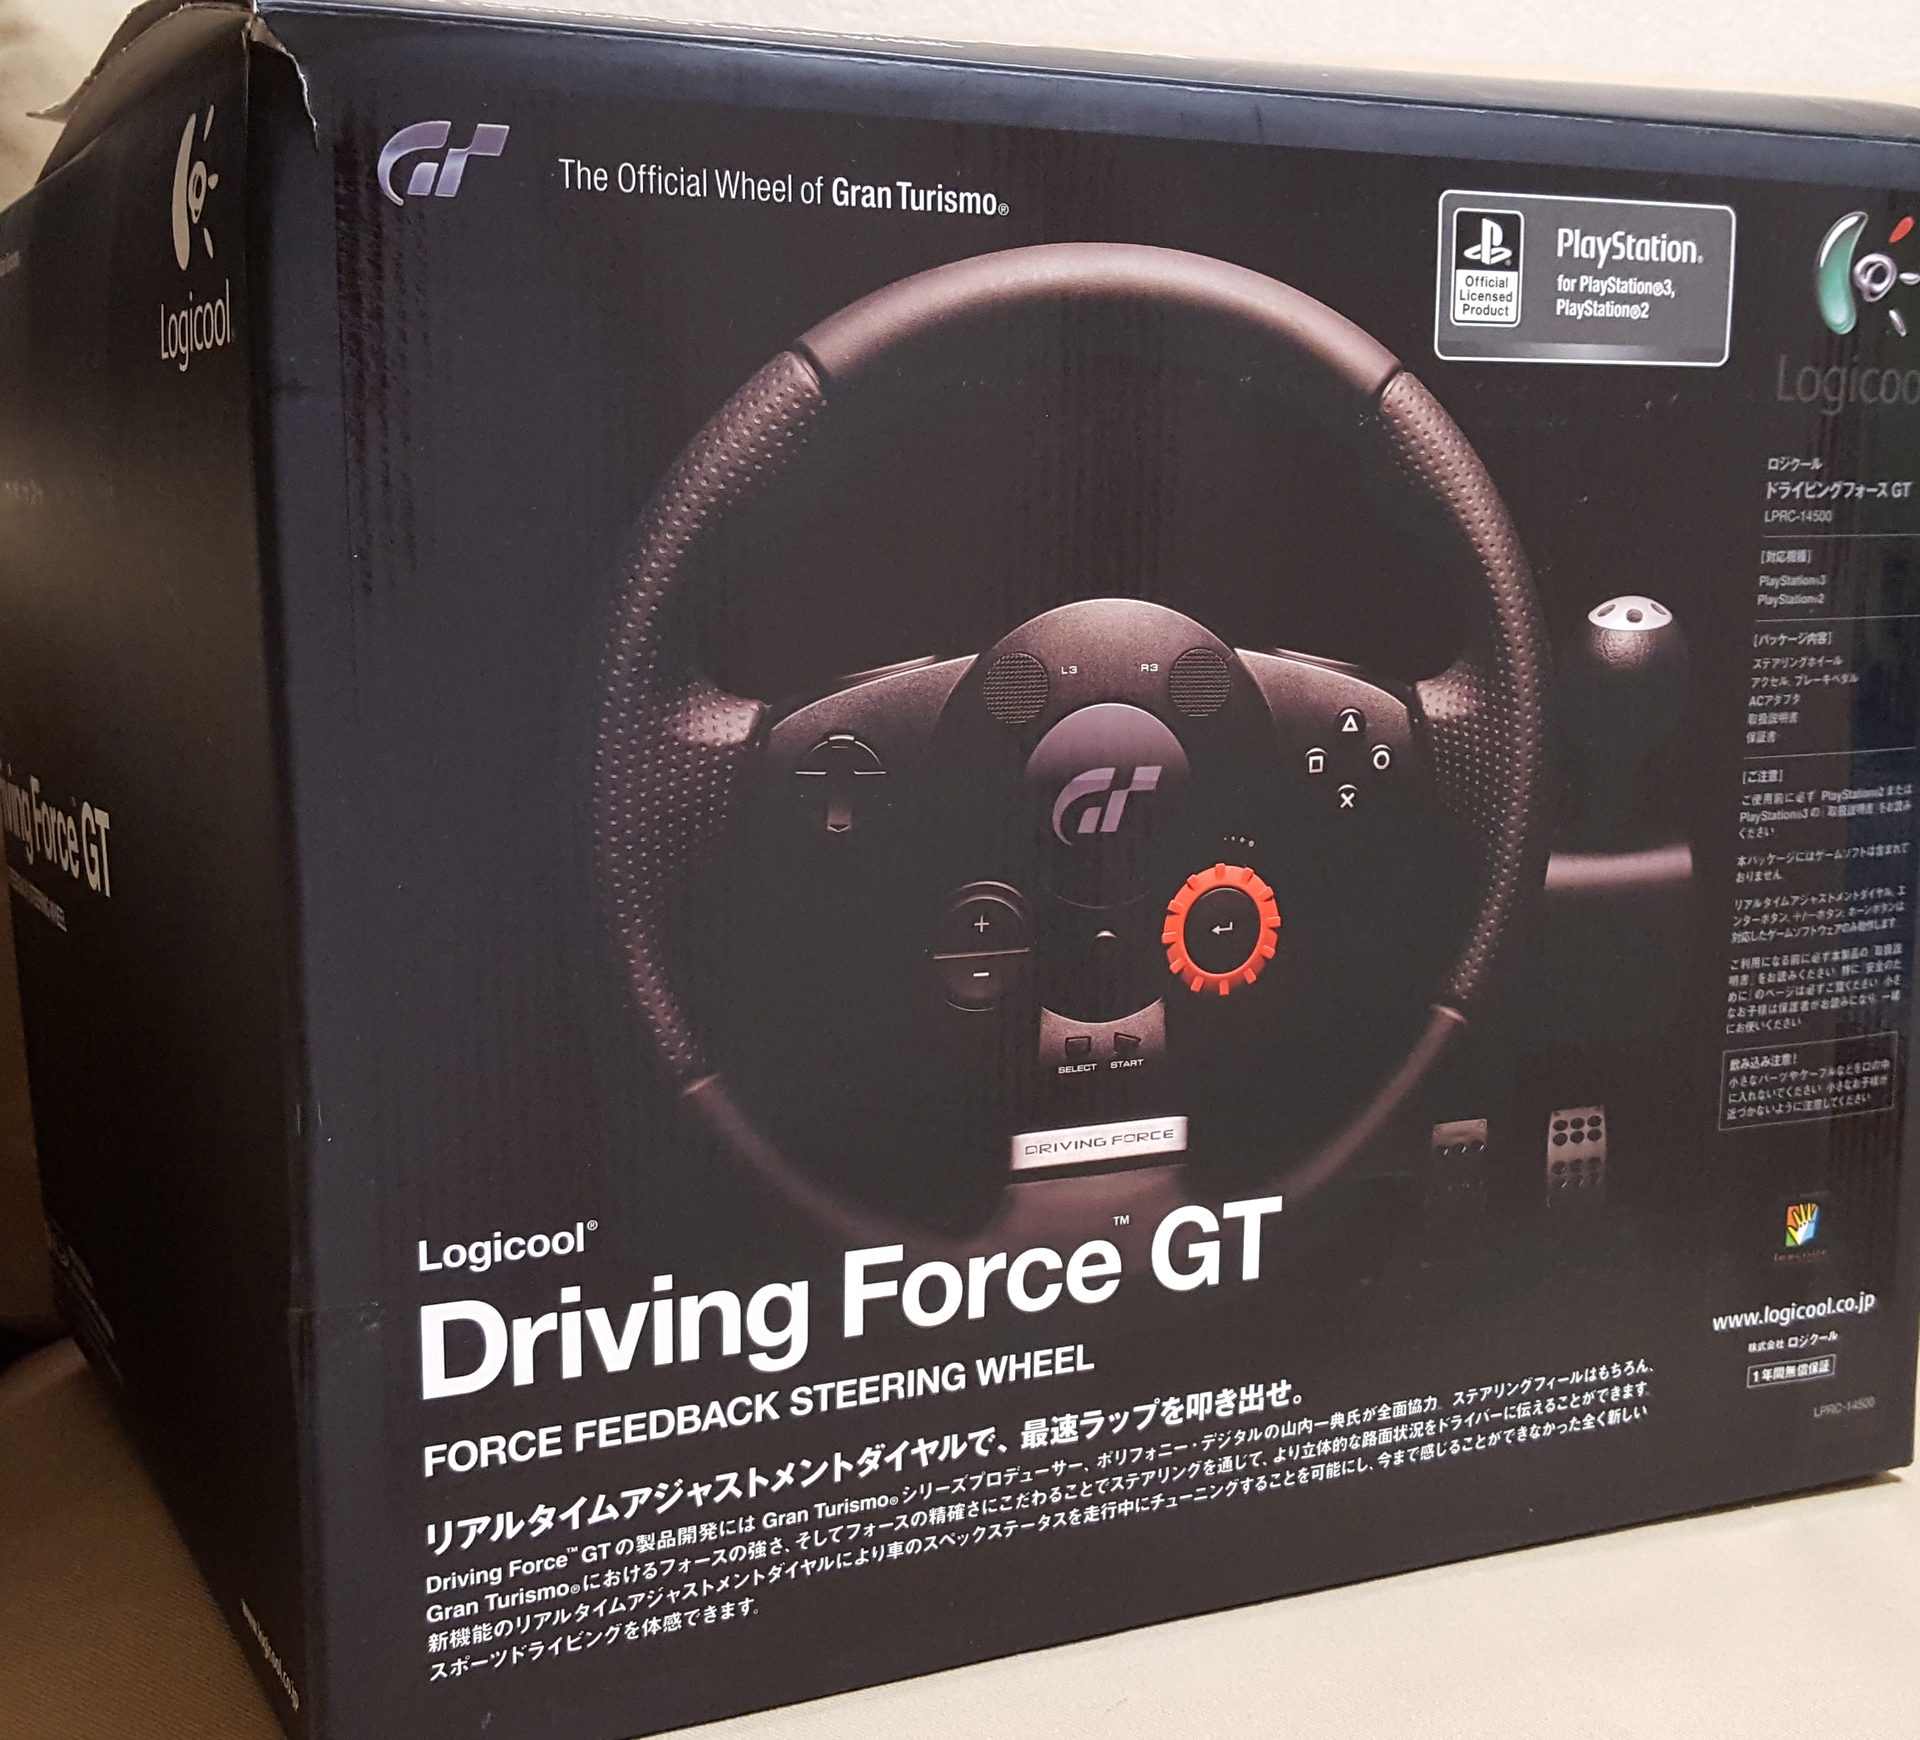 Driving Force GT: Unity VR Unreal 超初心者 入門